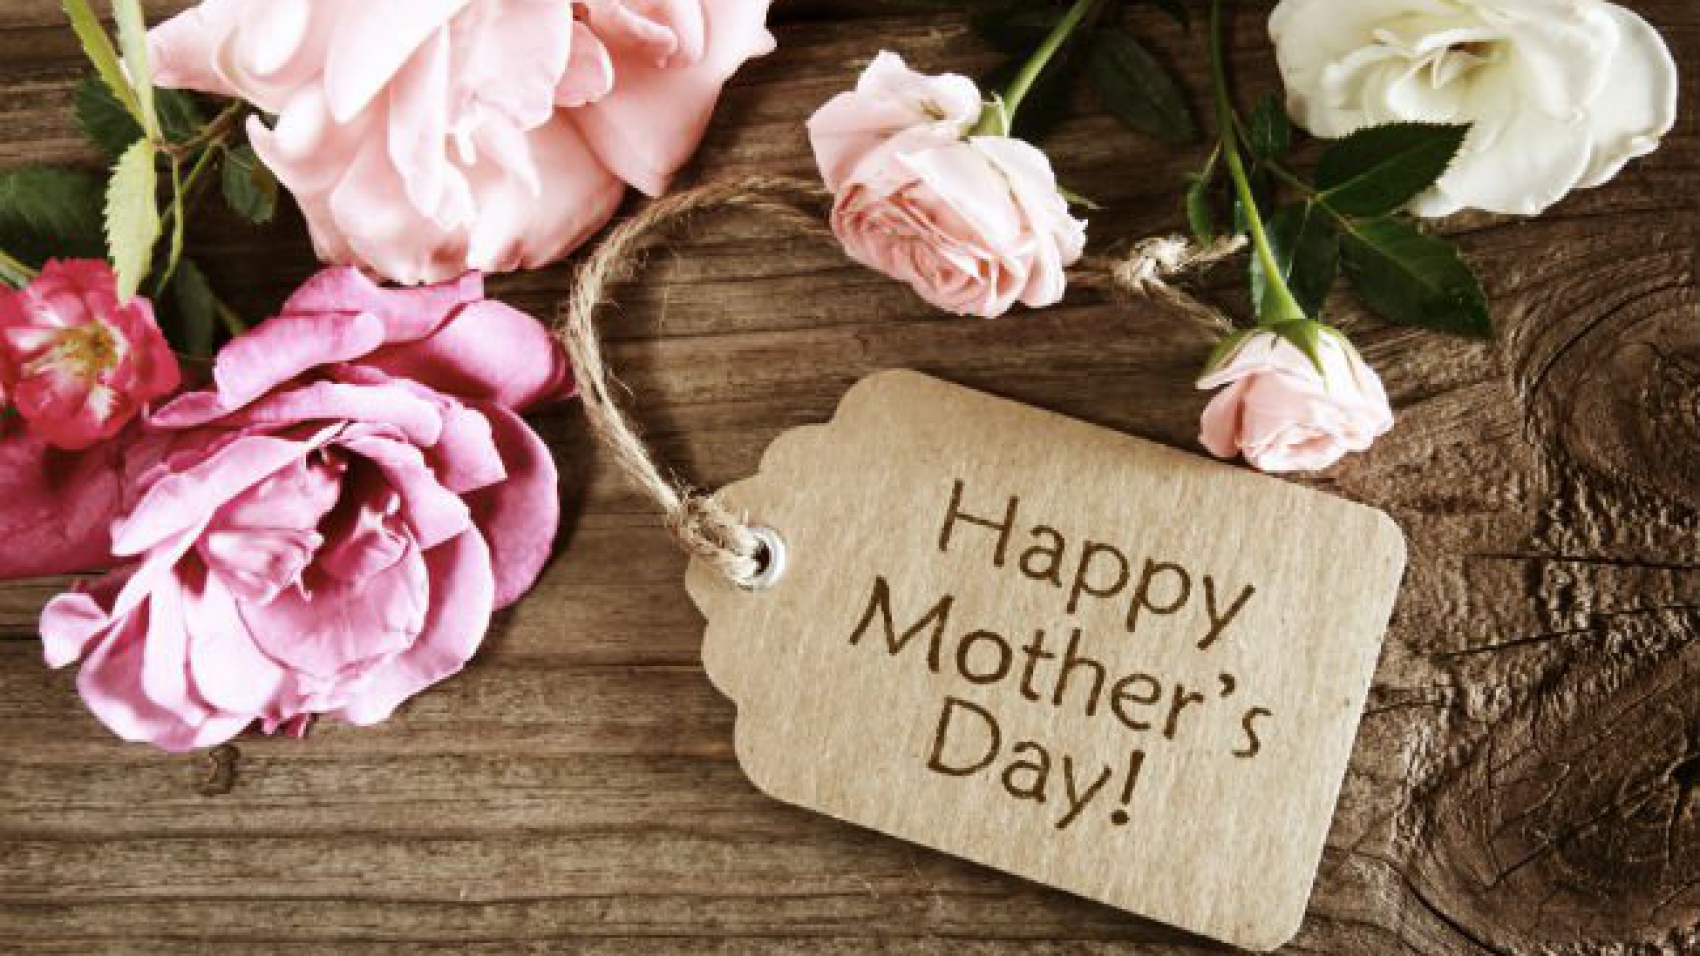 happy_mothers_day_.jpg__650x378_q85_crop_subsampling-2_upscale